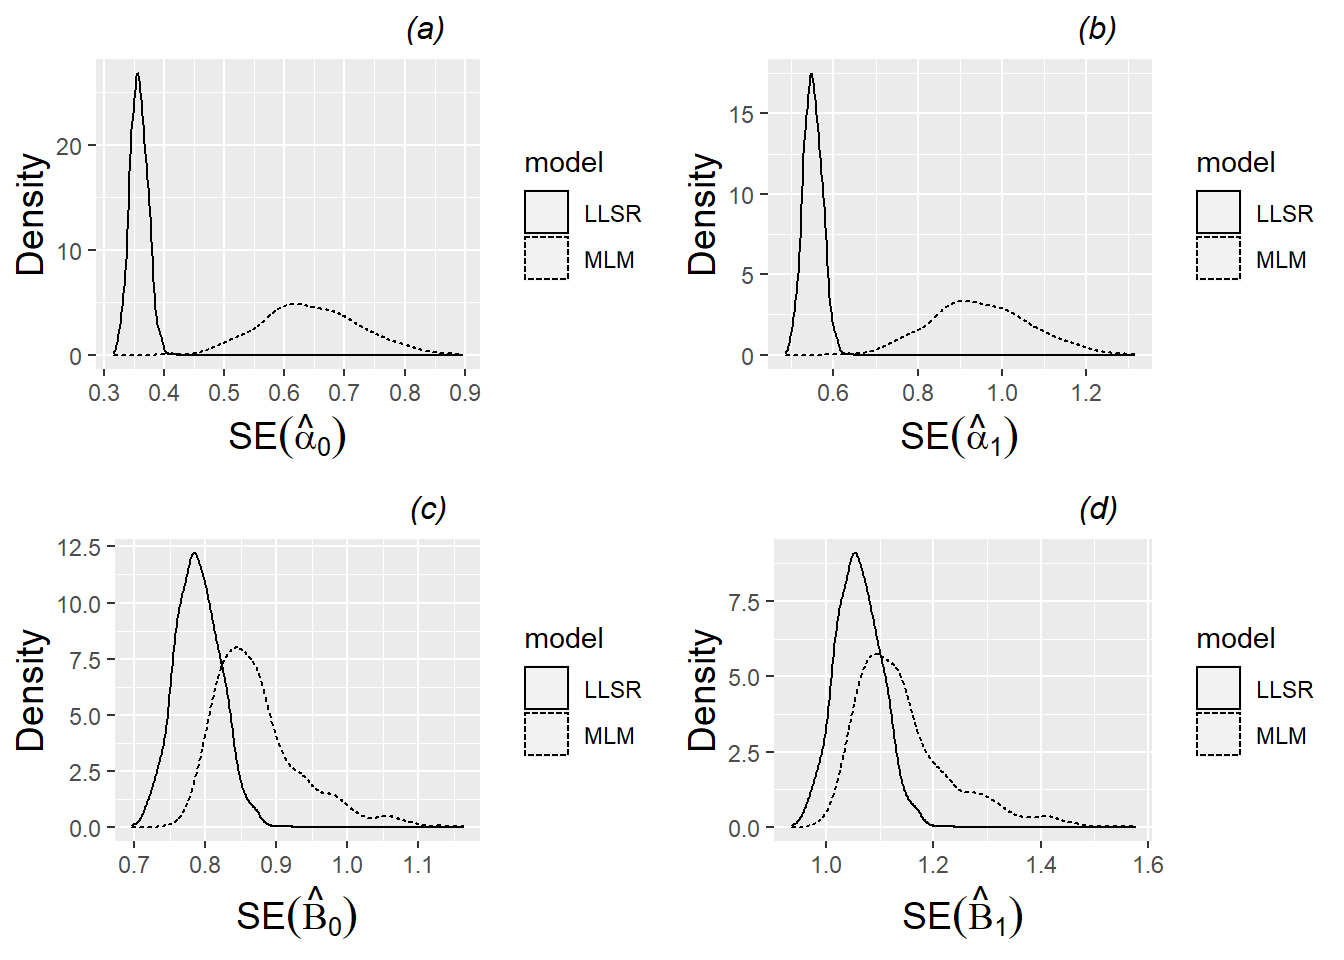 Density plots of standard errors of parameter estimates for the four fixed effects of Model C under both a multilevel model and linear least squares regression. 1000 sets of simulated data for the 37 subjects in our study were produced using estimated fixed and random effects from Model C. For each set of simulated data, estimates of (a) SE(\(\alpha_{0}\)), (b) SE(\(\alpha_{1}\)), (c) SE(\(\beta_{0}\)), and (d) SE(\(\beta_{1}\)) were obtained using both a multilevel and an LLSR model. Each plot then shows a density plot for the 1000 estimates of the corresponding standard error term using multilevel modeling vs. a similar density plot for the 1000 estimates using LLSR.